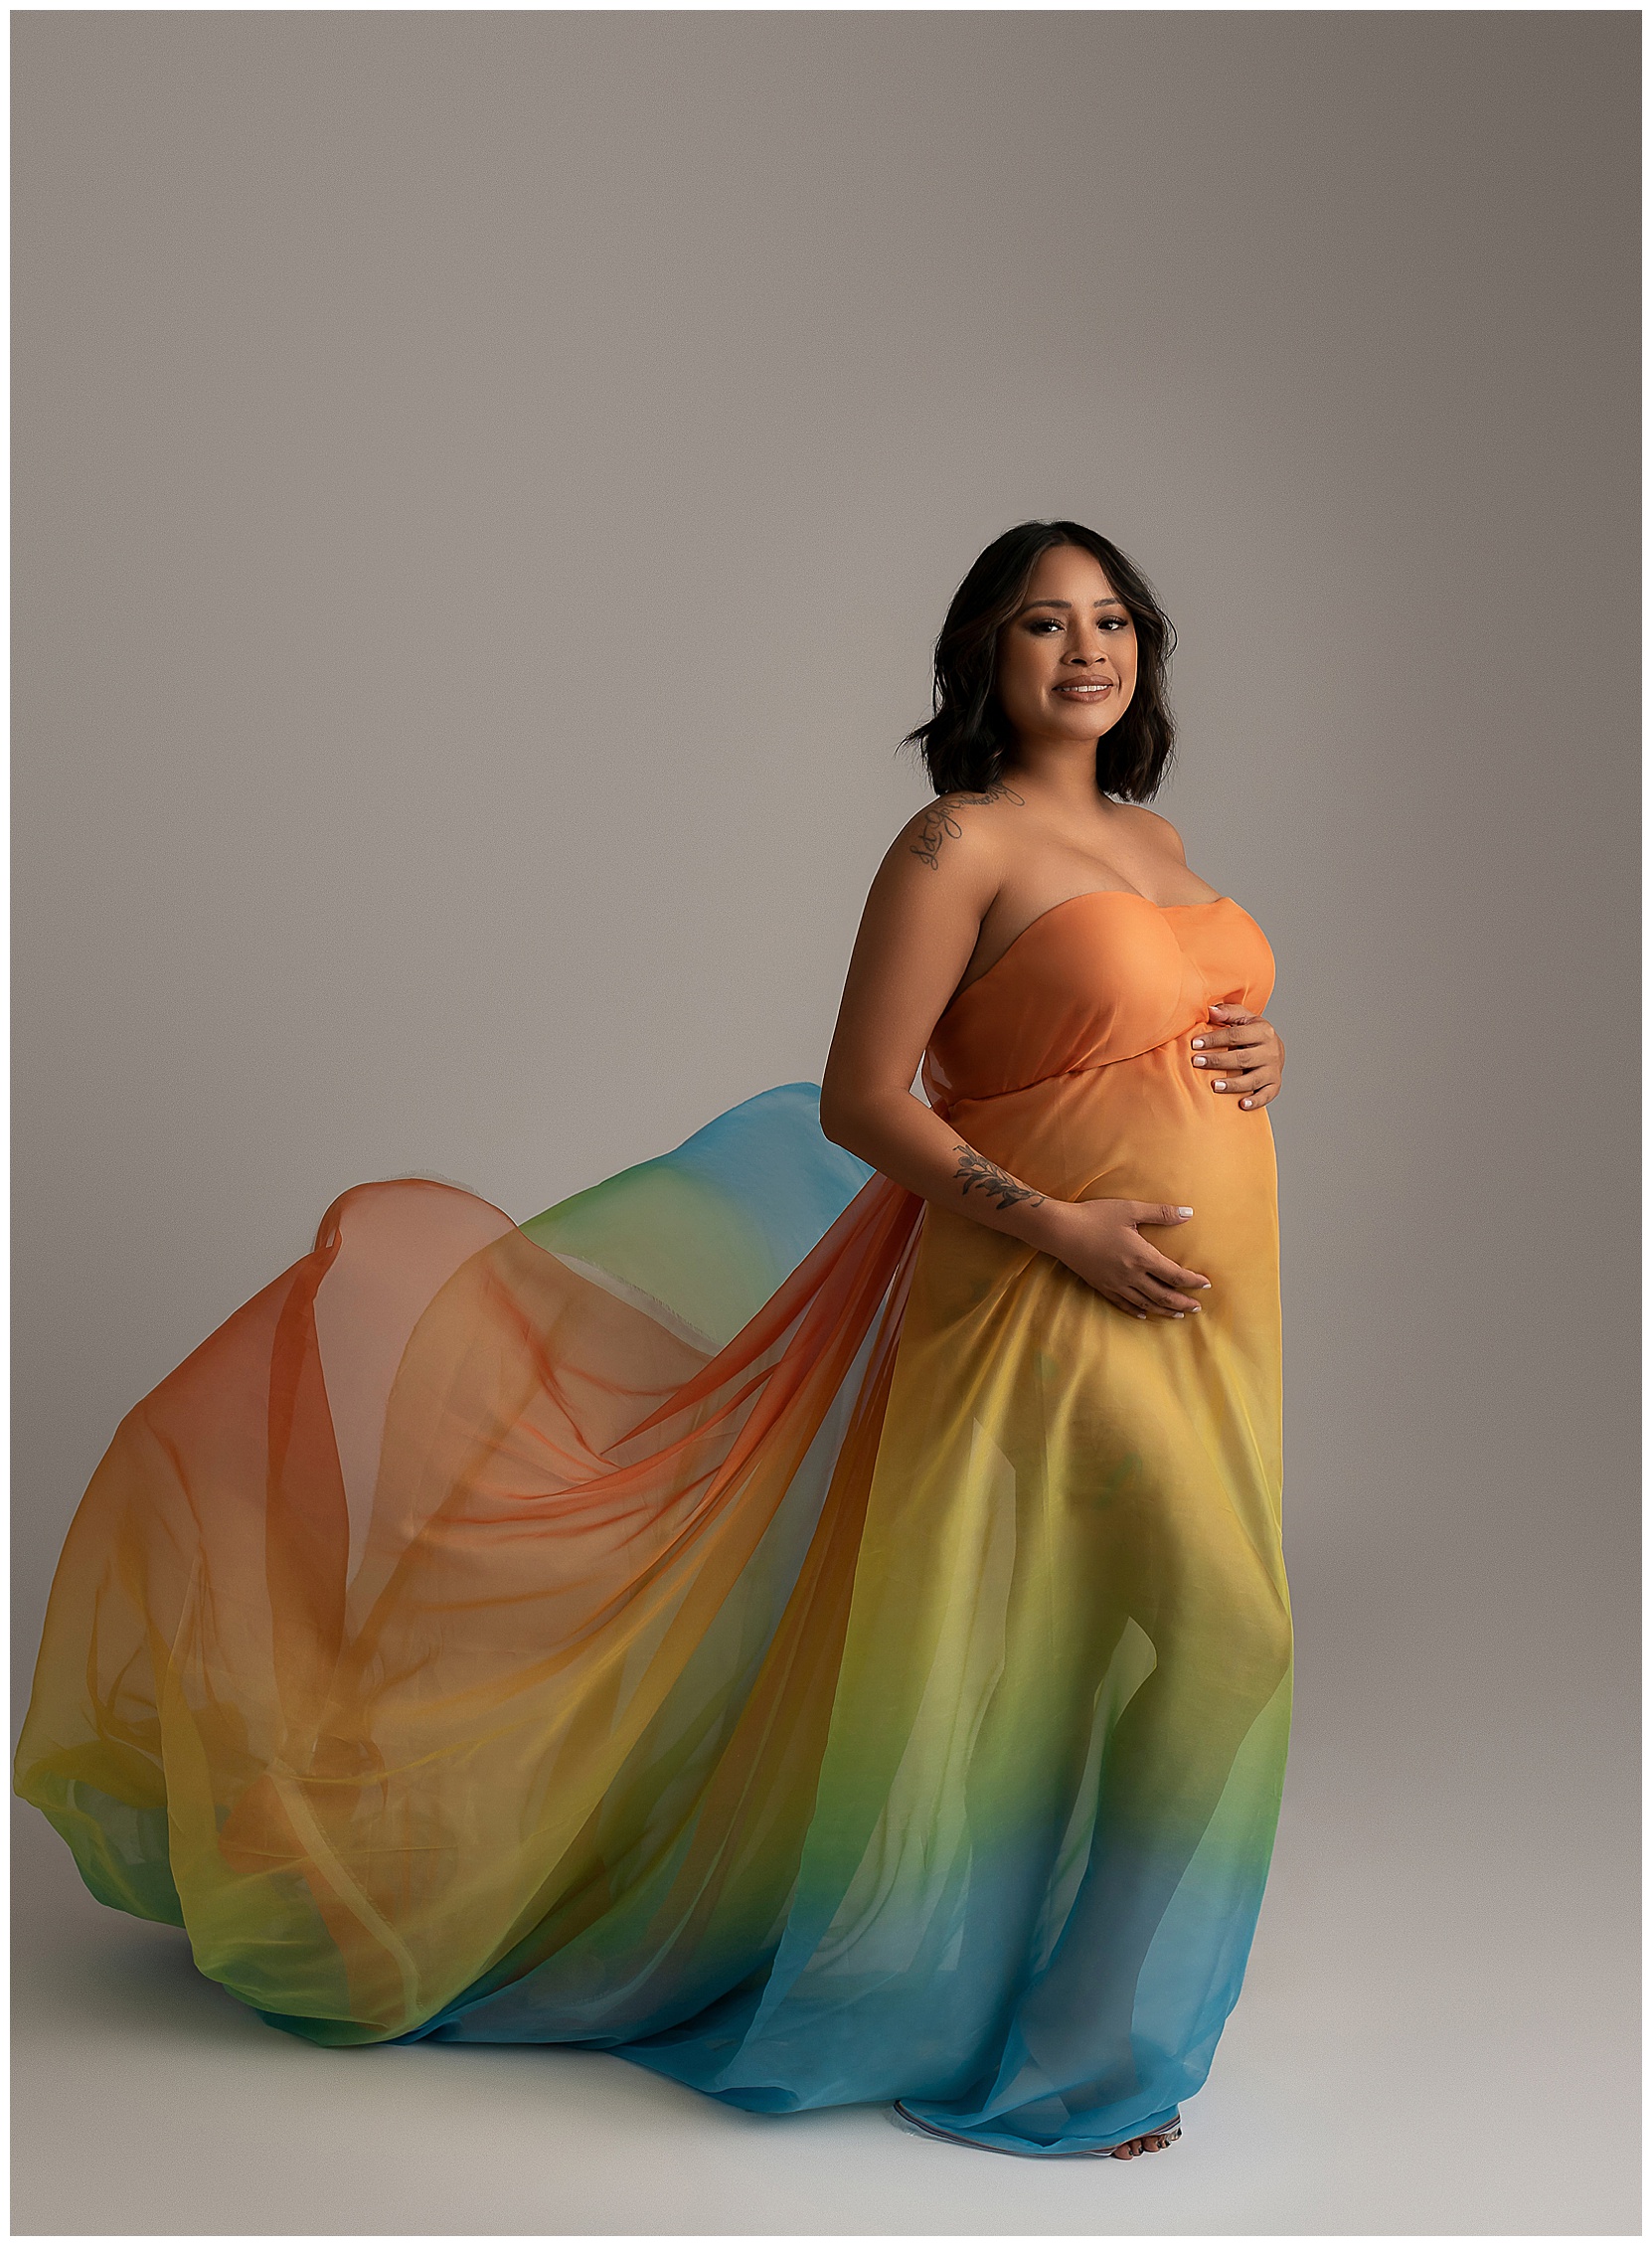 Studio maternity photo featuring a woman in a rainbow gown